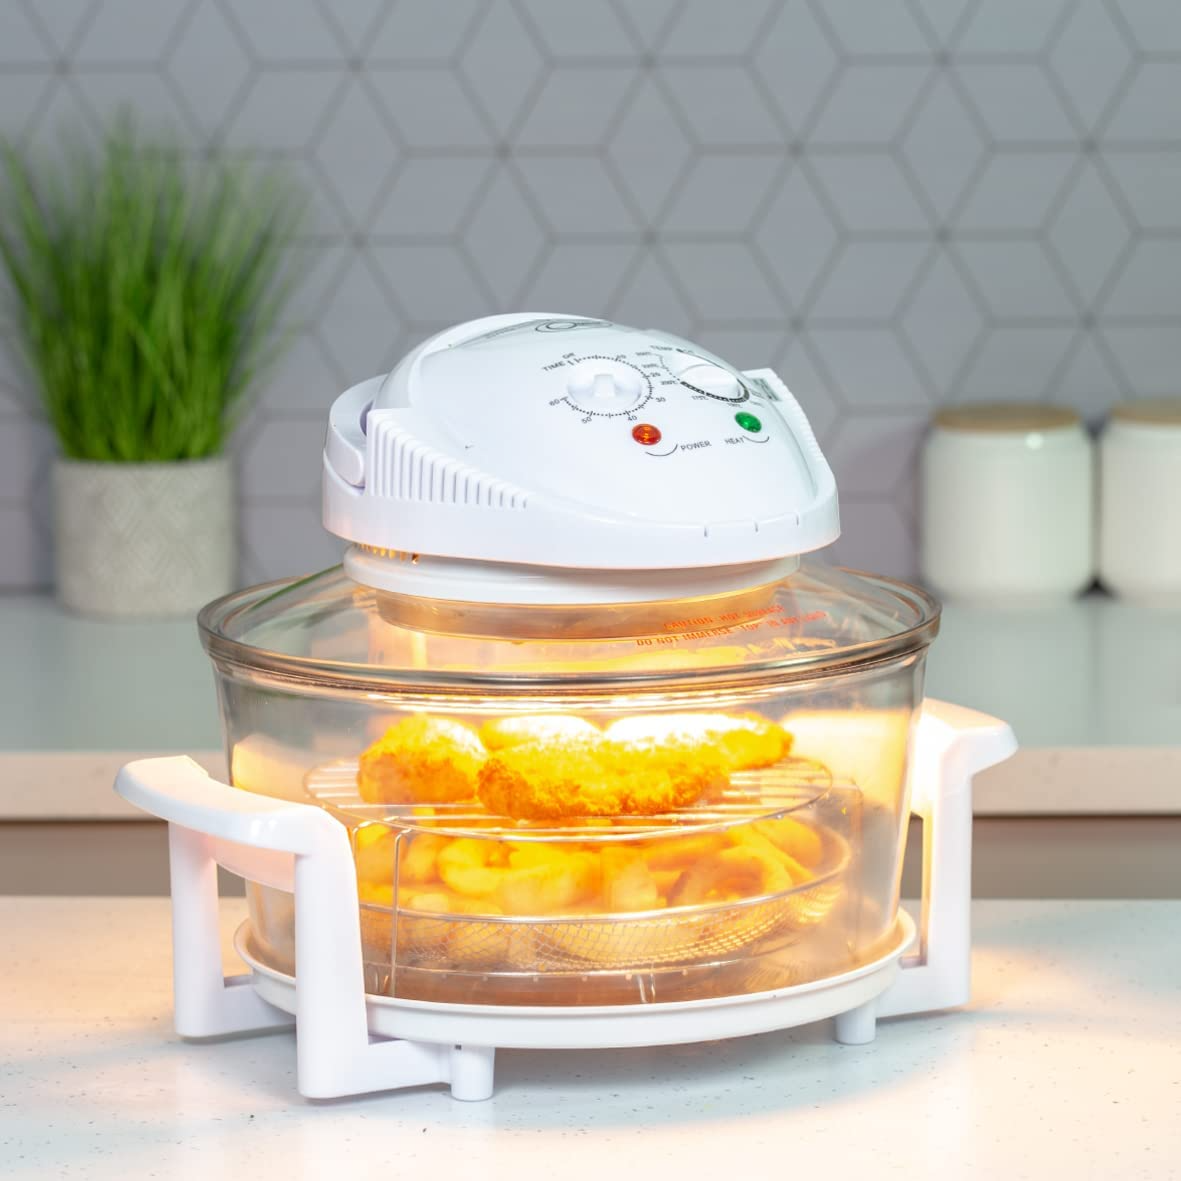 Quest 43890 12 Litre Halogen Oven / Low Fat, Multi-Function Oven /  Toughened Glass Material / Healthy Air Cooking / Self-Cleaning Mode / 60  Minute Timer / 1400W : Amazon.co.uk: Home & Kitchen